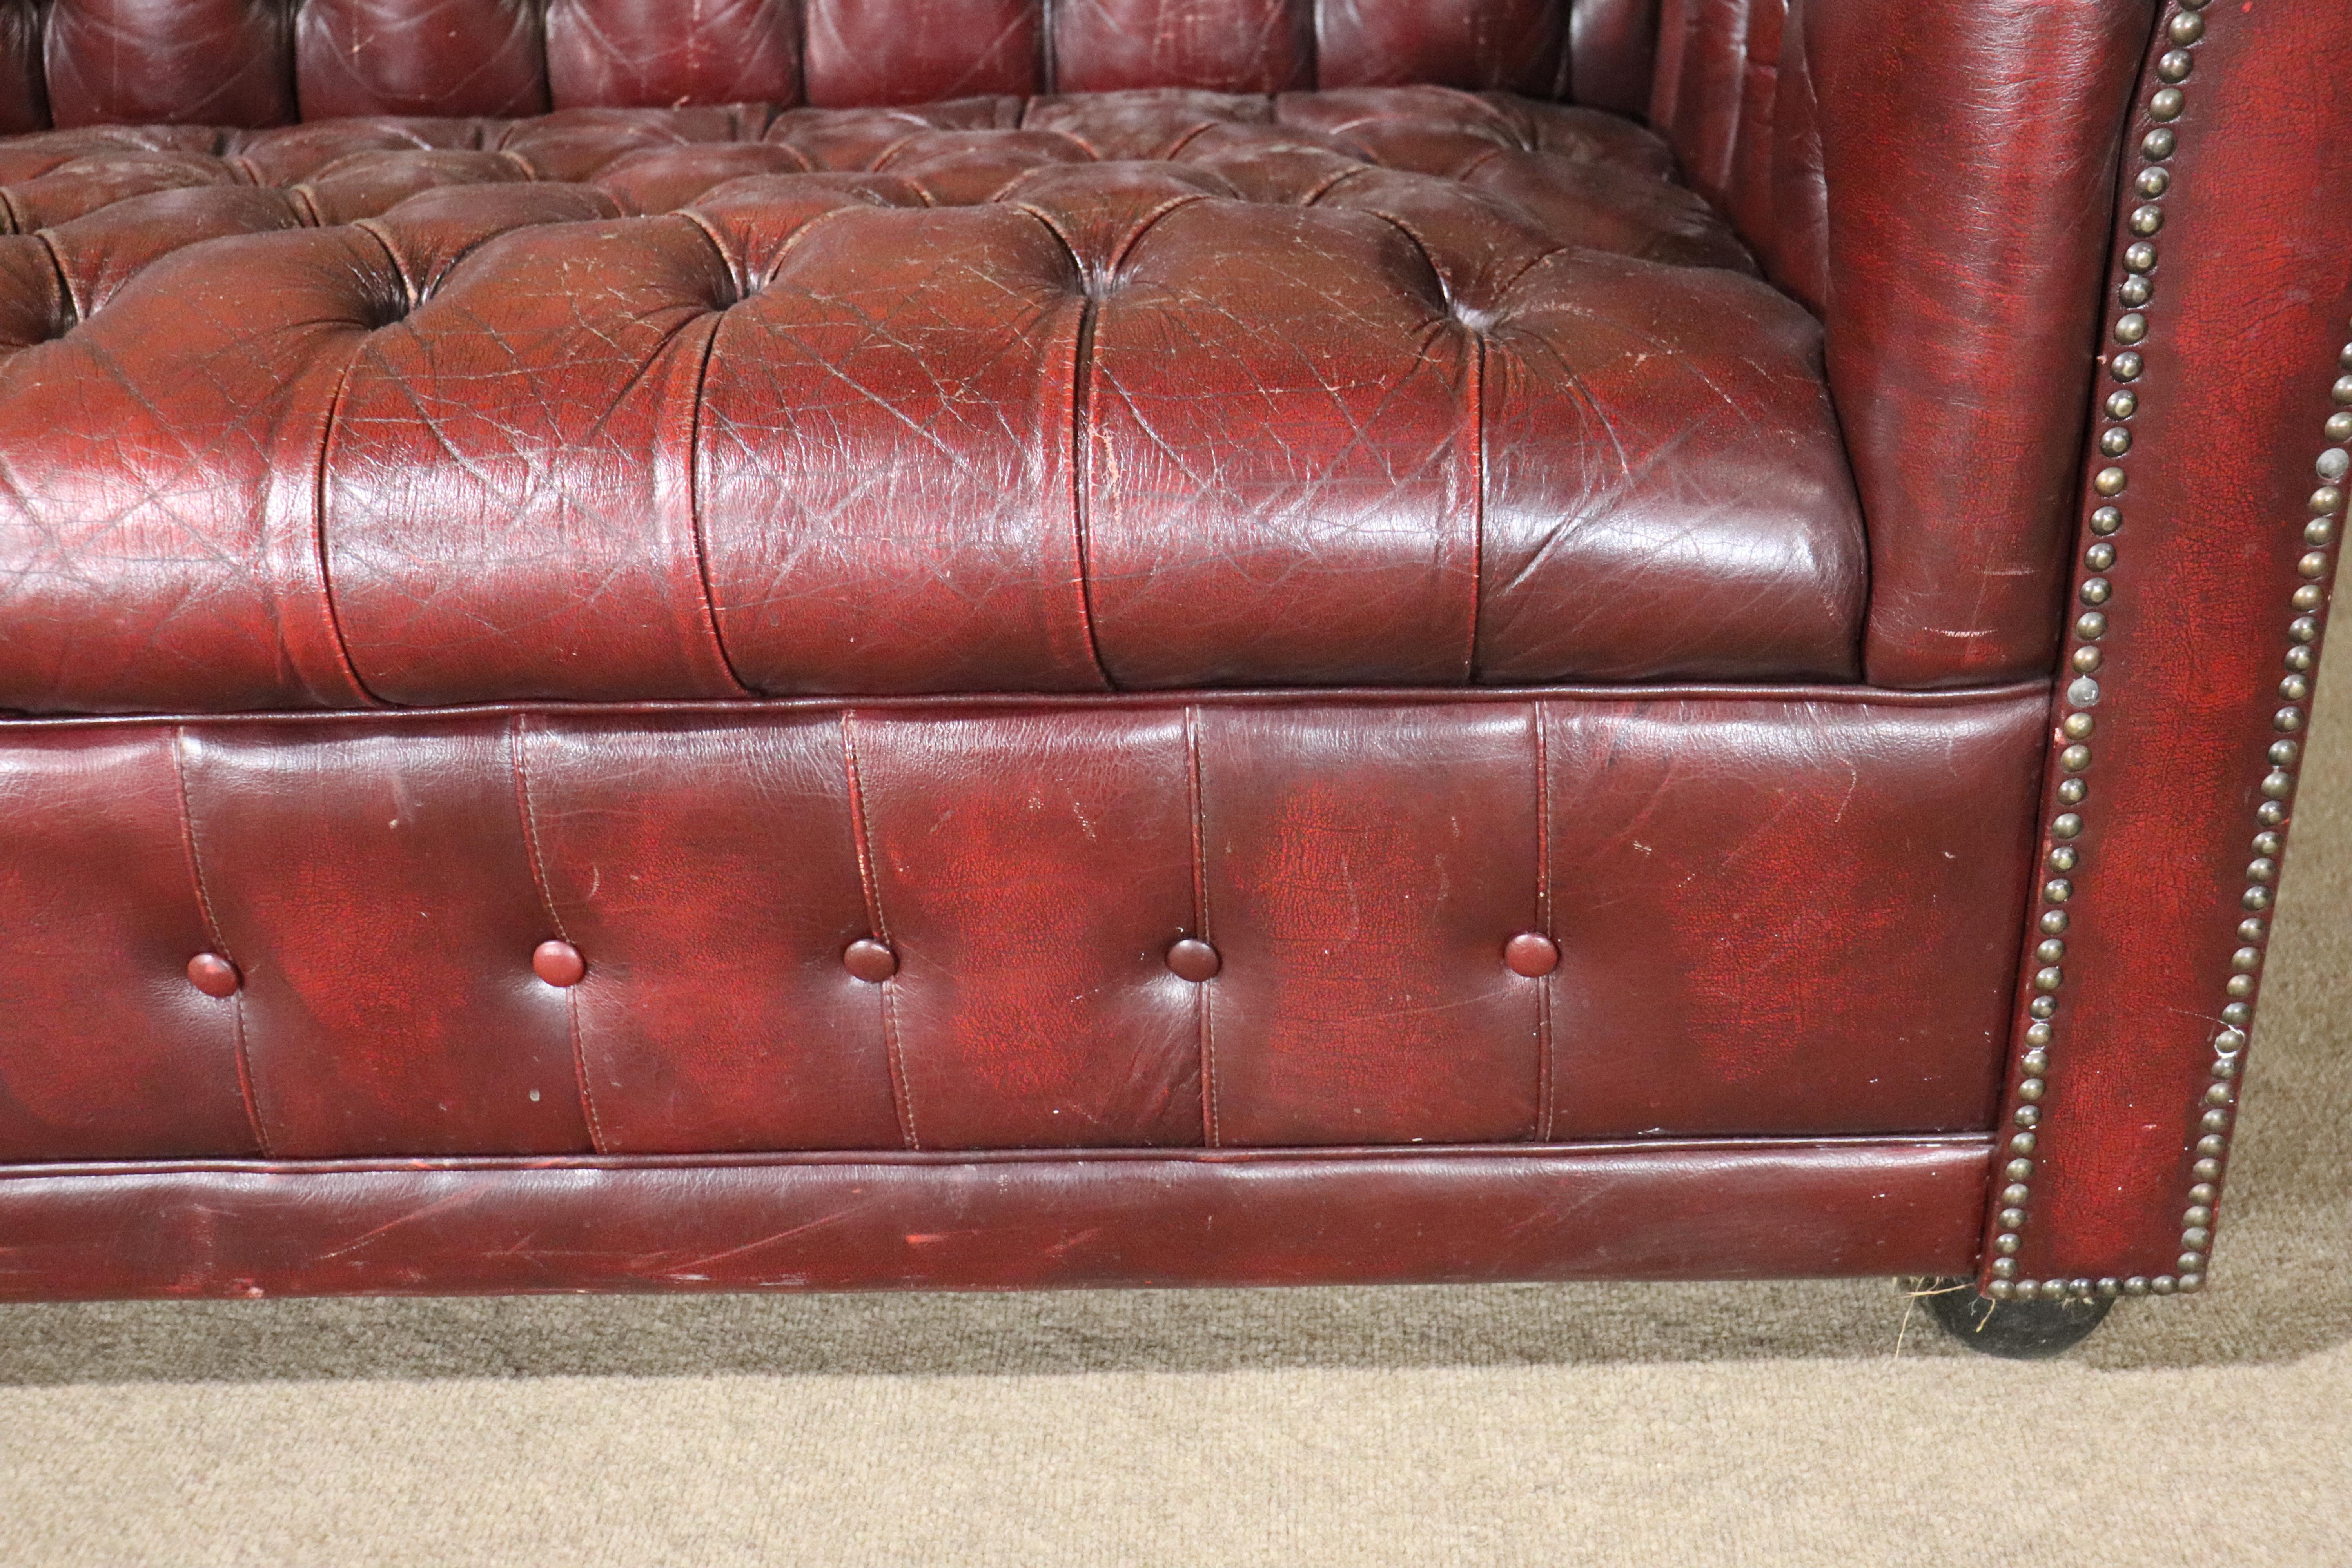 Burgundy Chesterfield Sofa In Good Condition For Sale In Brooklyn, NY